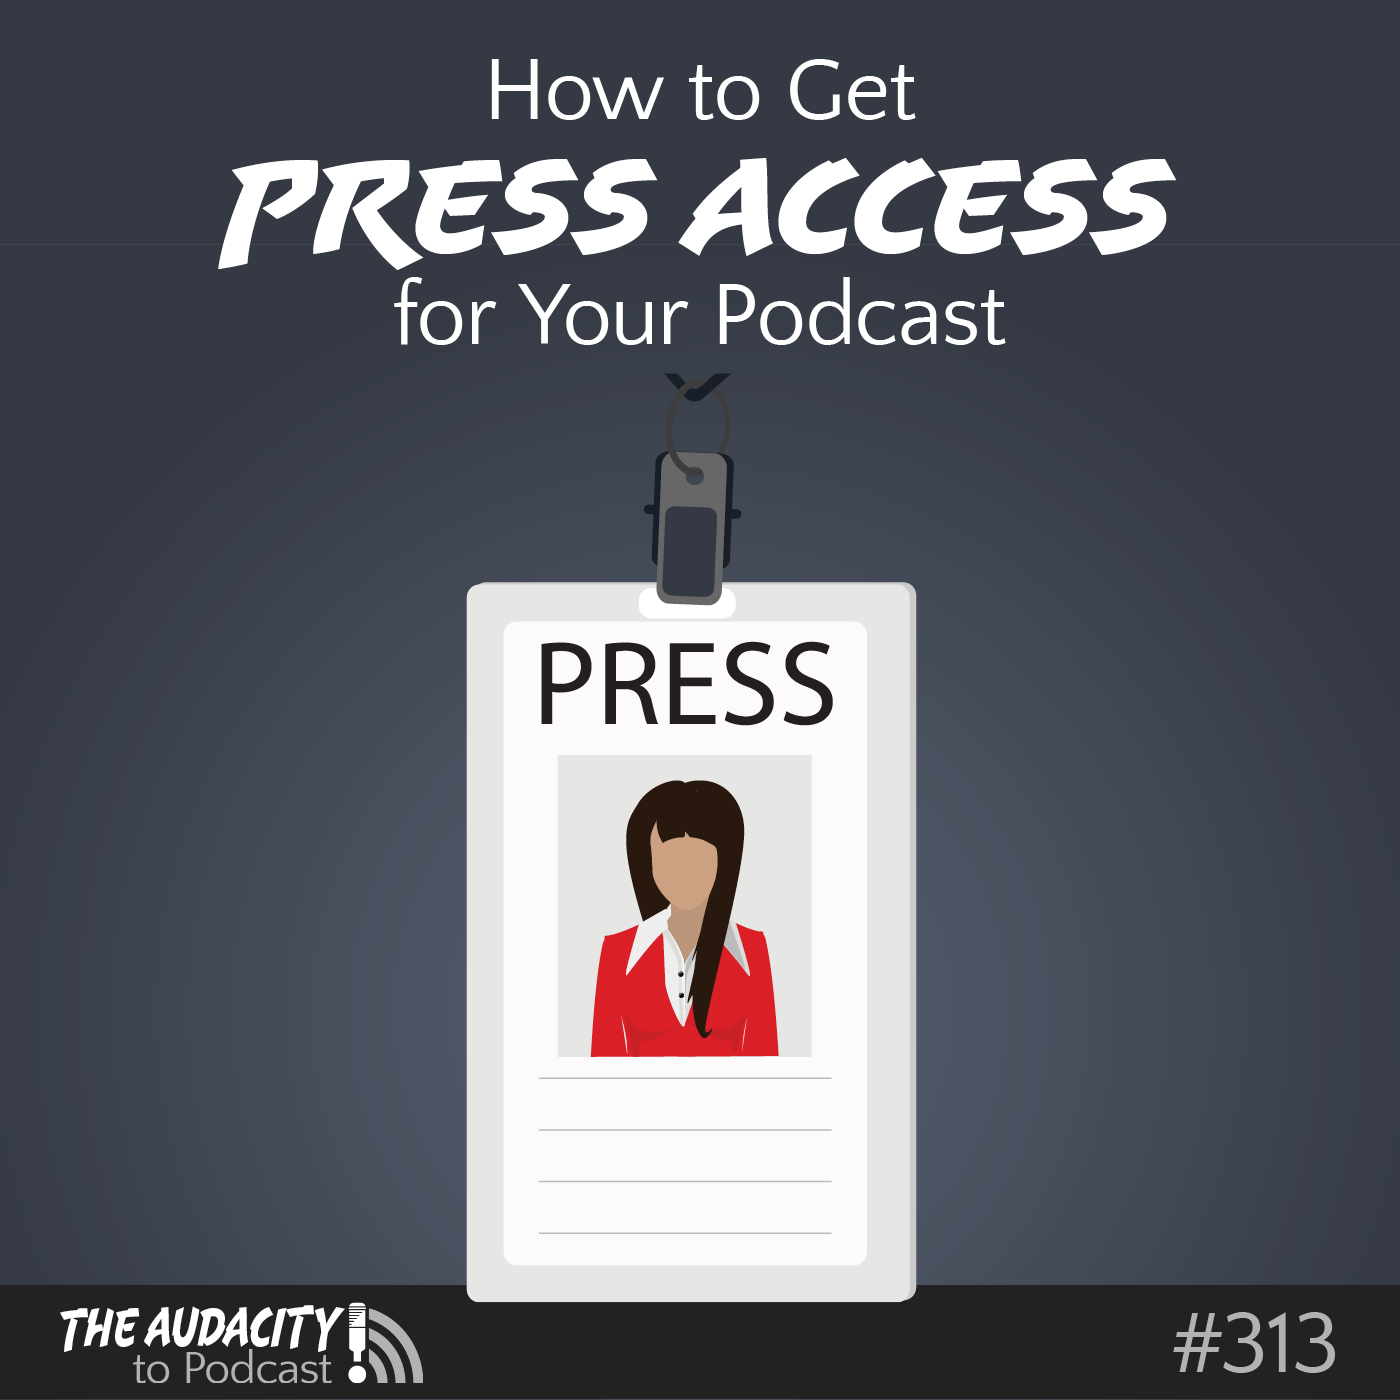 How to Get Press Access for Your Podcast